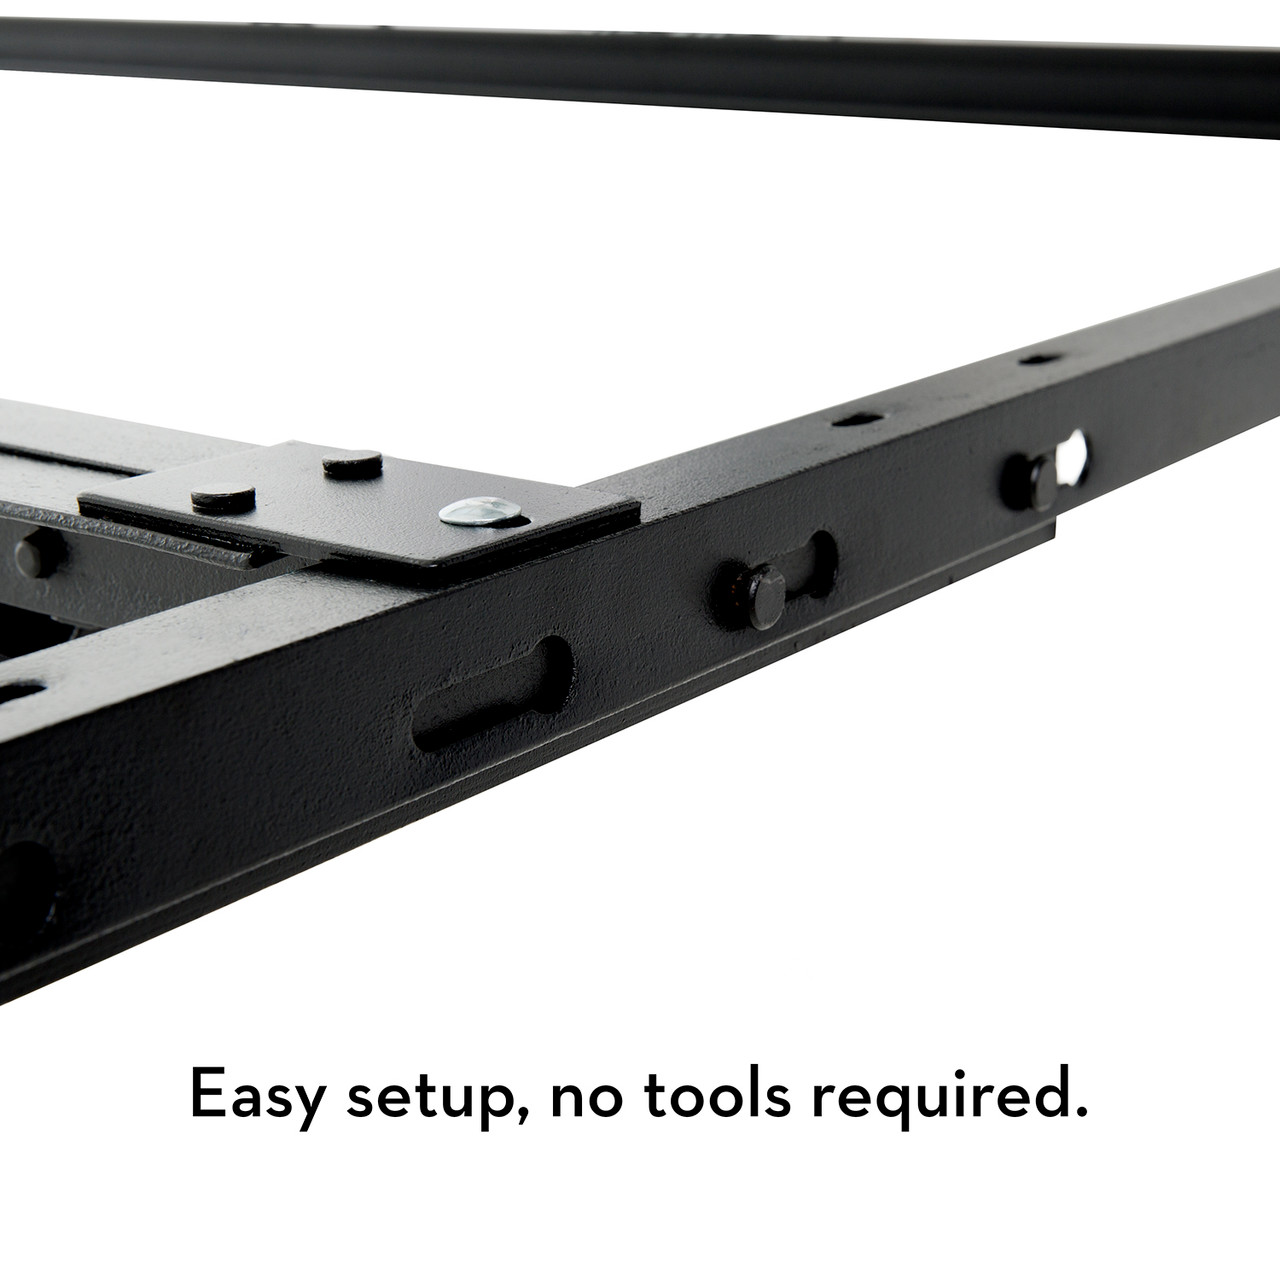 Malouf 8" Universal Steel Bed Frame, Detailed View Of Secured Locking Mechanism